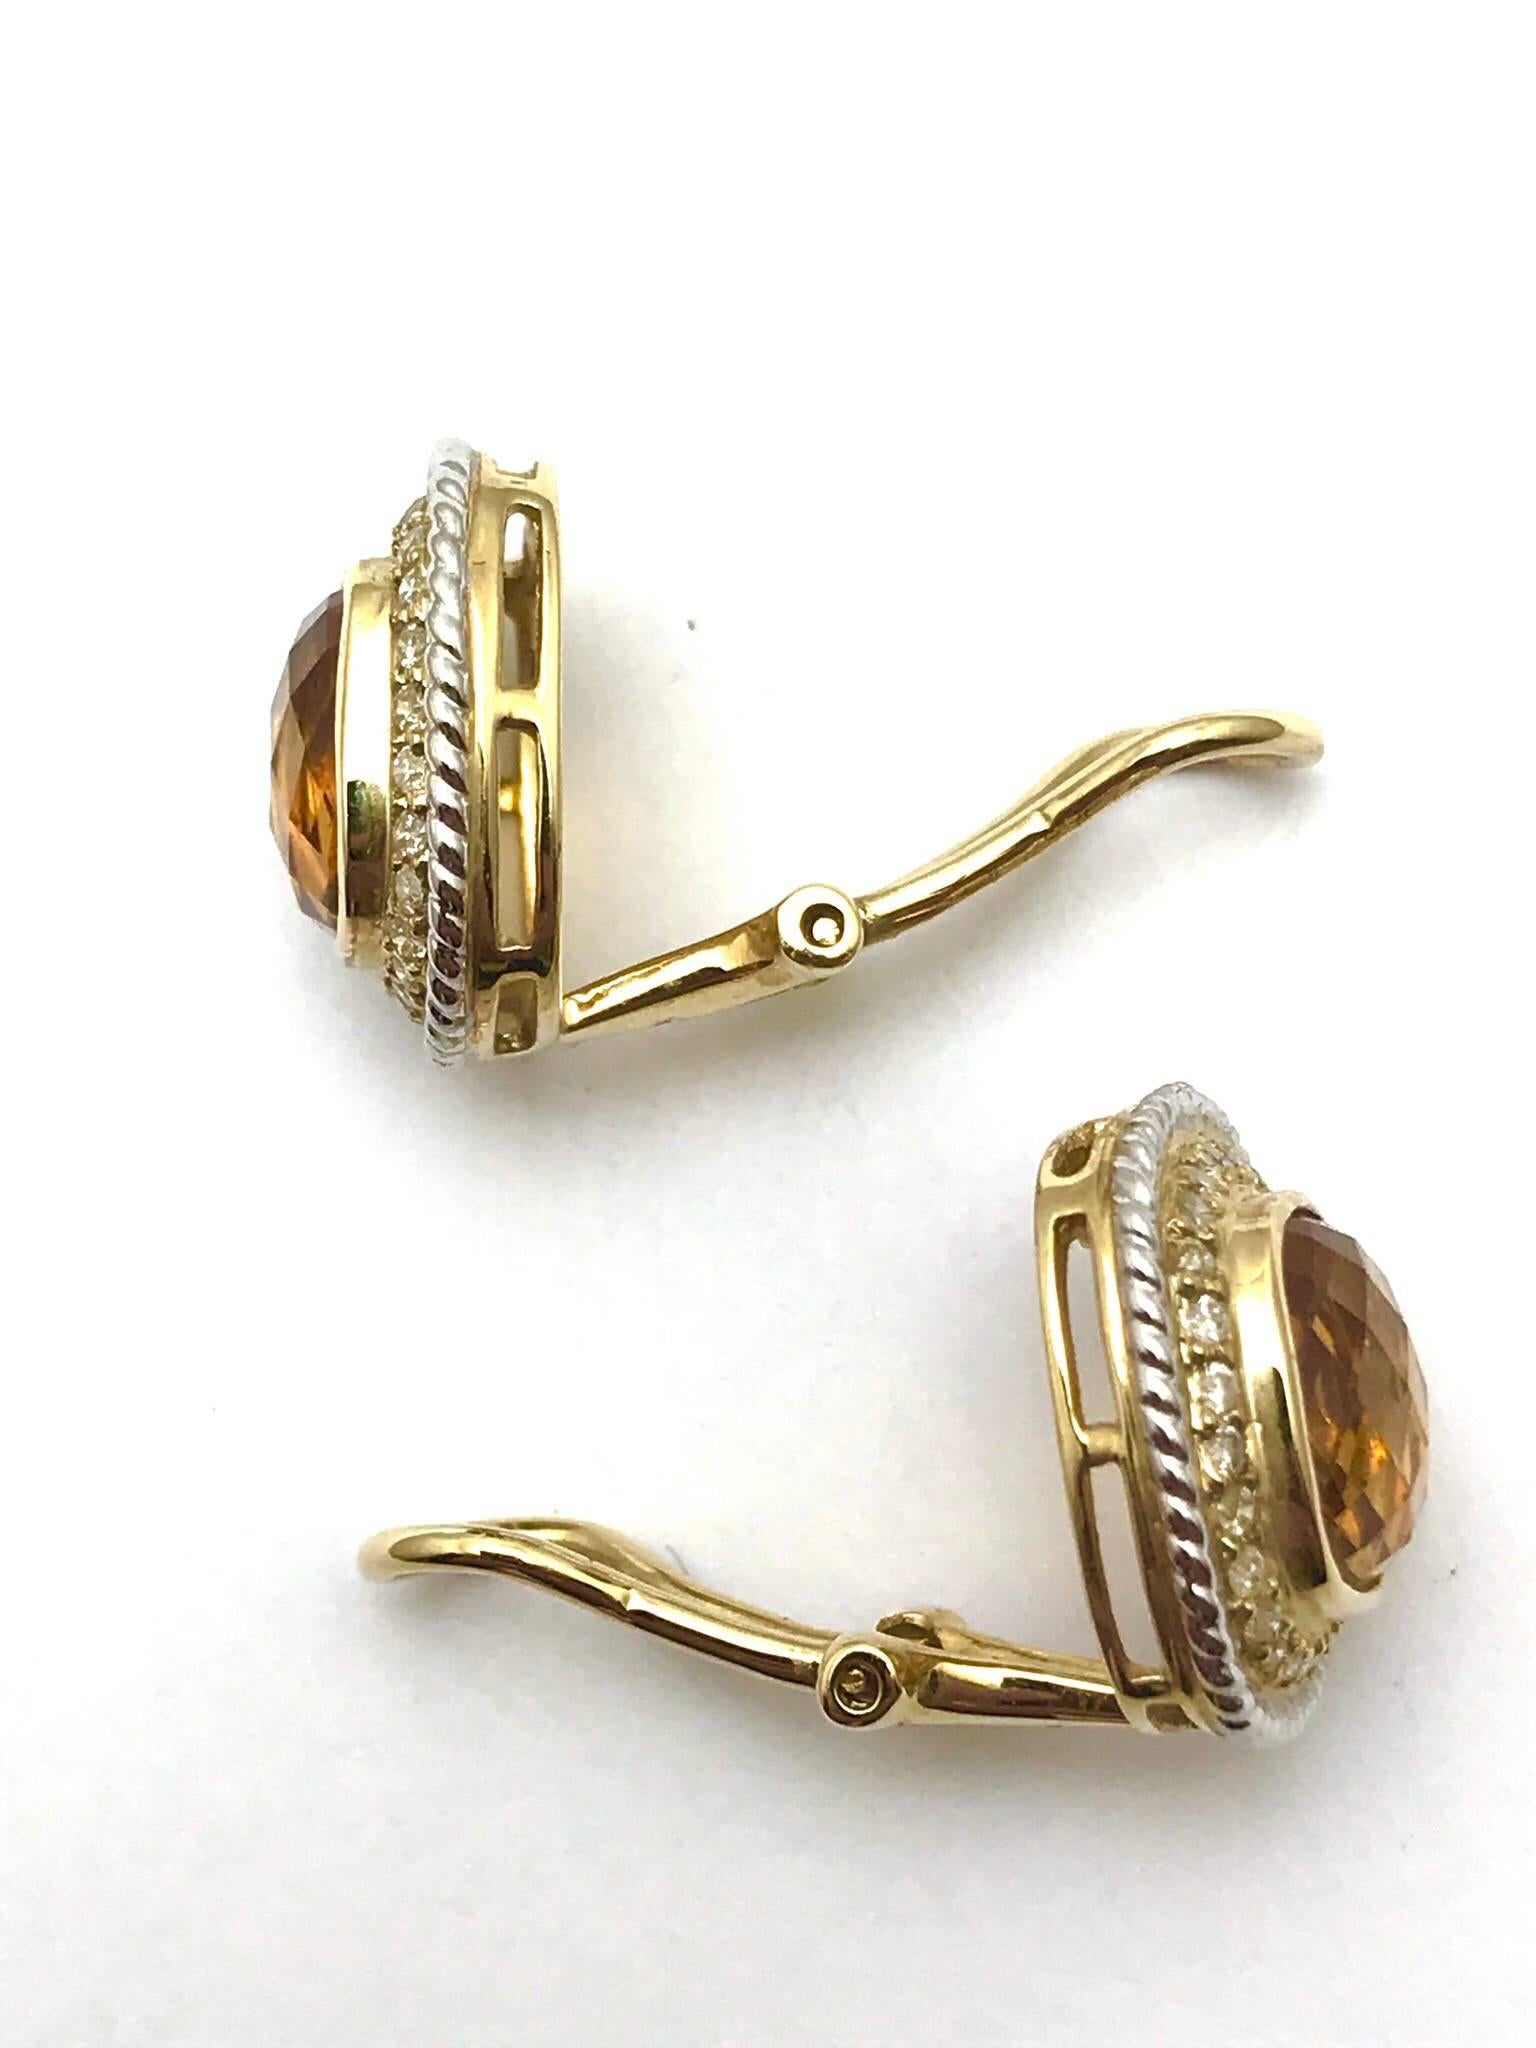 A pair of 3.00 carats total weight pillow cut citrines and diamonds in 14 karat white and yellow gold clip earrings.  The earrings are designed with the bezel set citrine centers, surrounded by a single row of round brilliant diamonds, and framed by